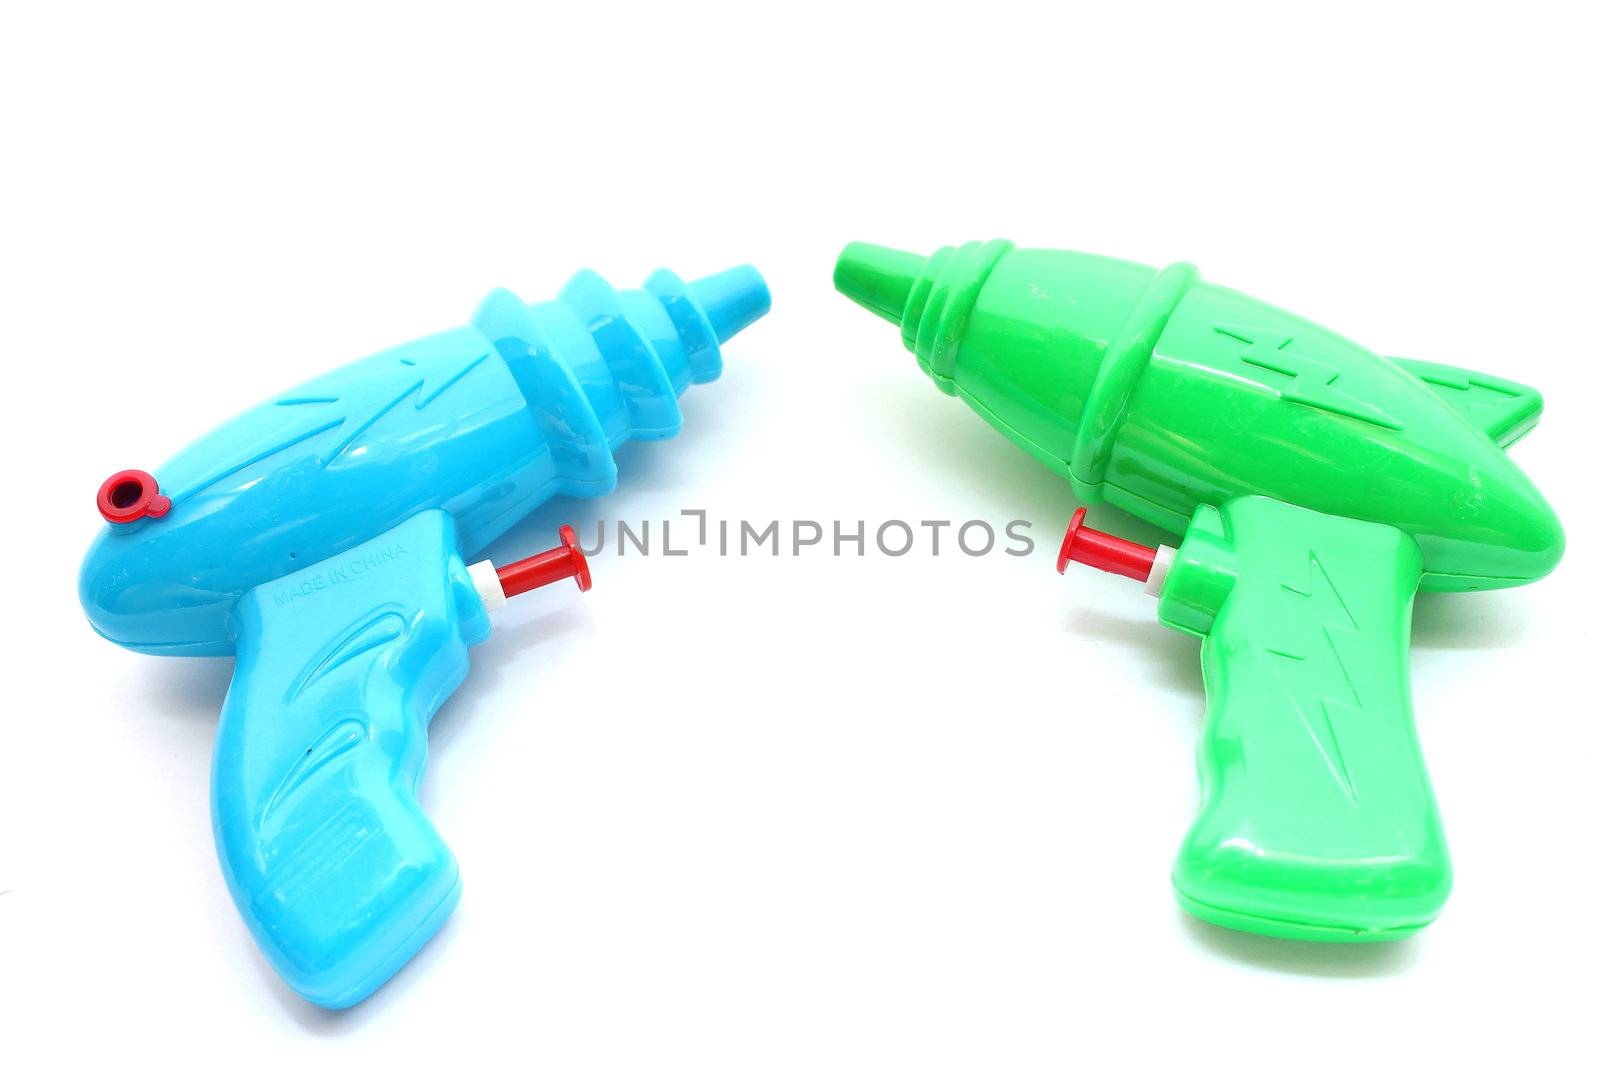 Toy water guns used for play